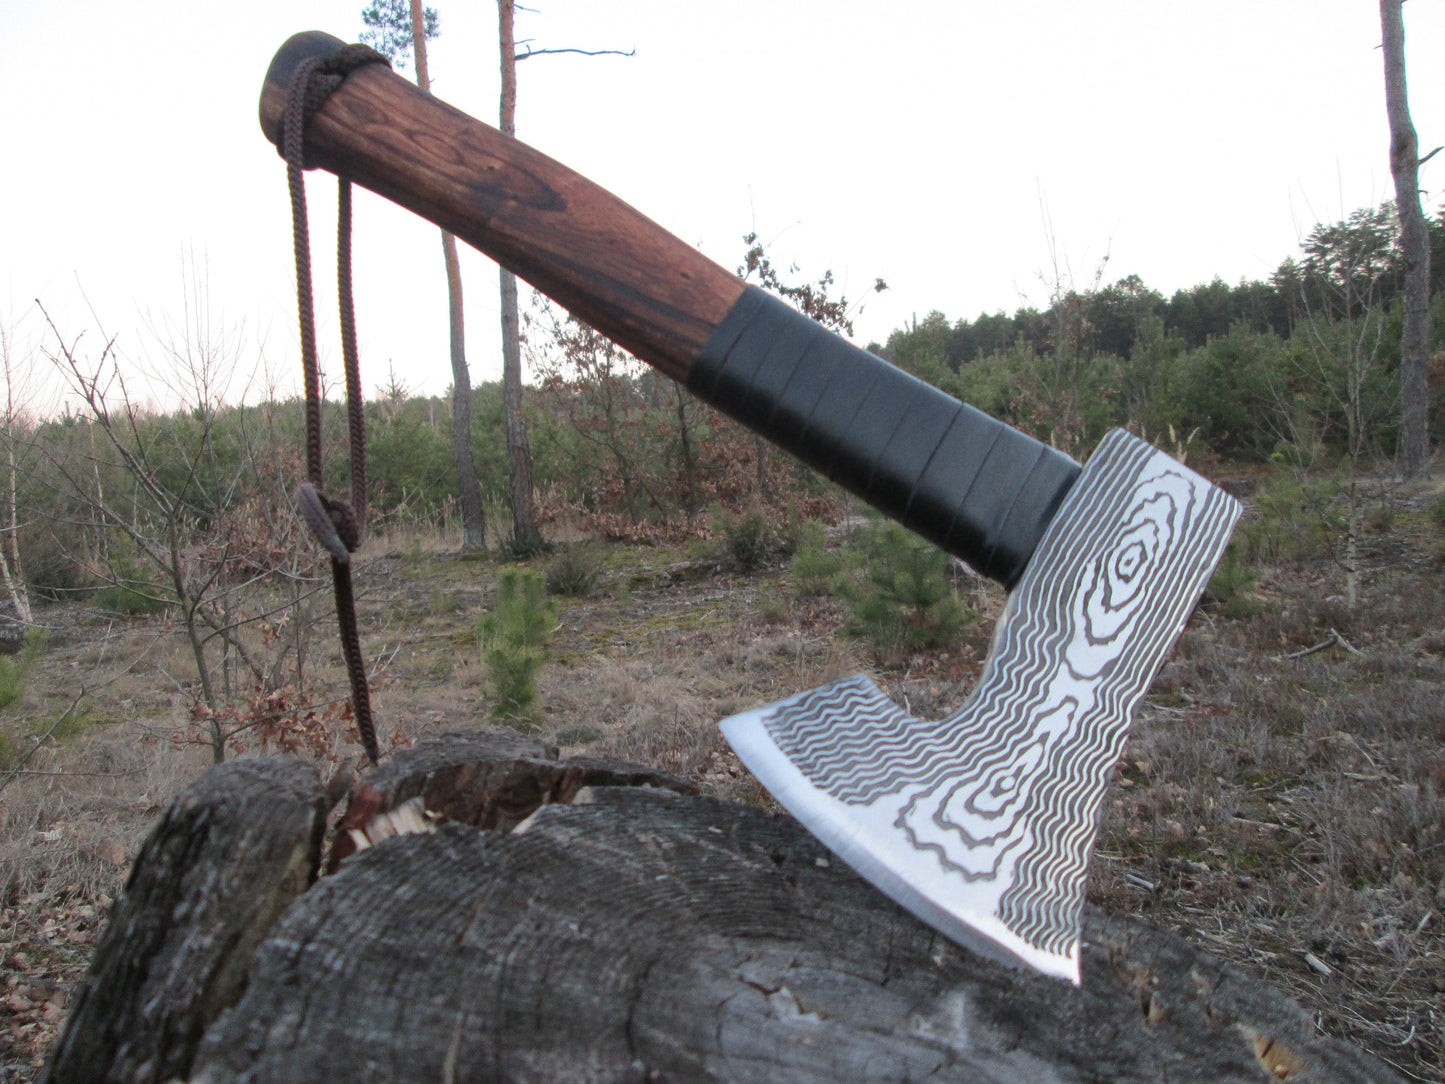 Personalized axe, groomsmen gift, axe, viking axe, traveling, hatchet, mens gifts, birthday, Christmas, camping, hiking,iron gift,steel gift